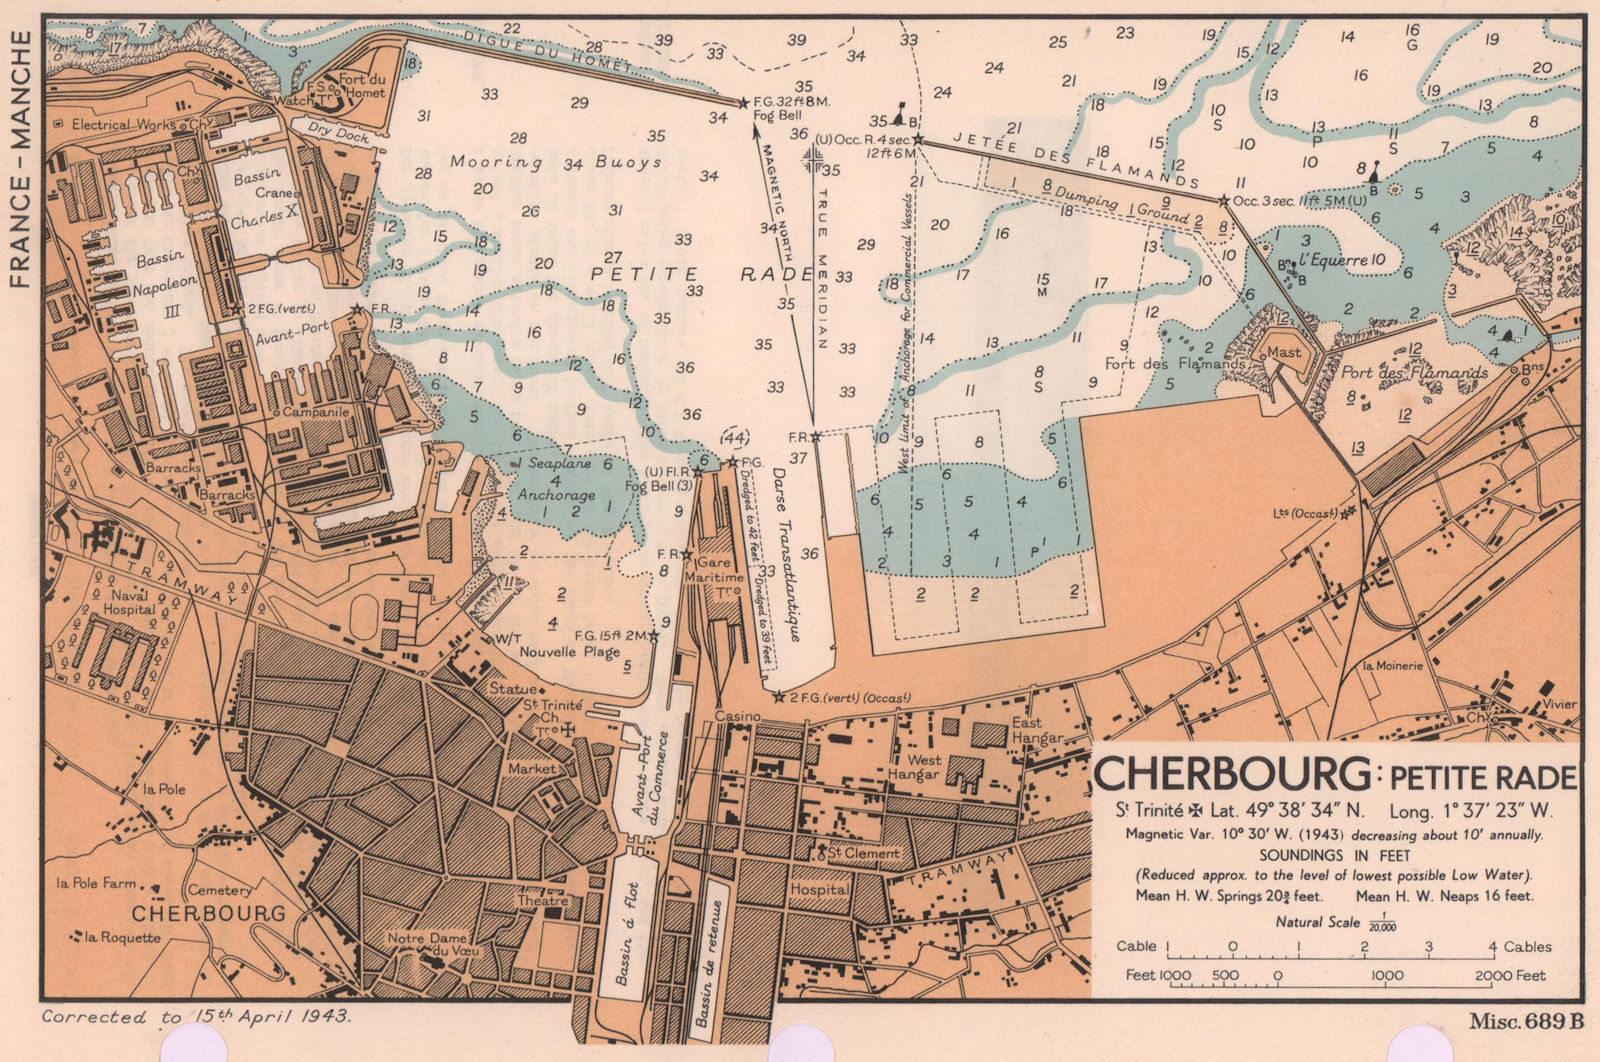 Associate Product Cherbourg Petite Rade town plan & sea chart. D-Day planning map. ADMIRALTY 1943